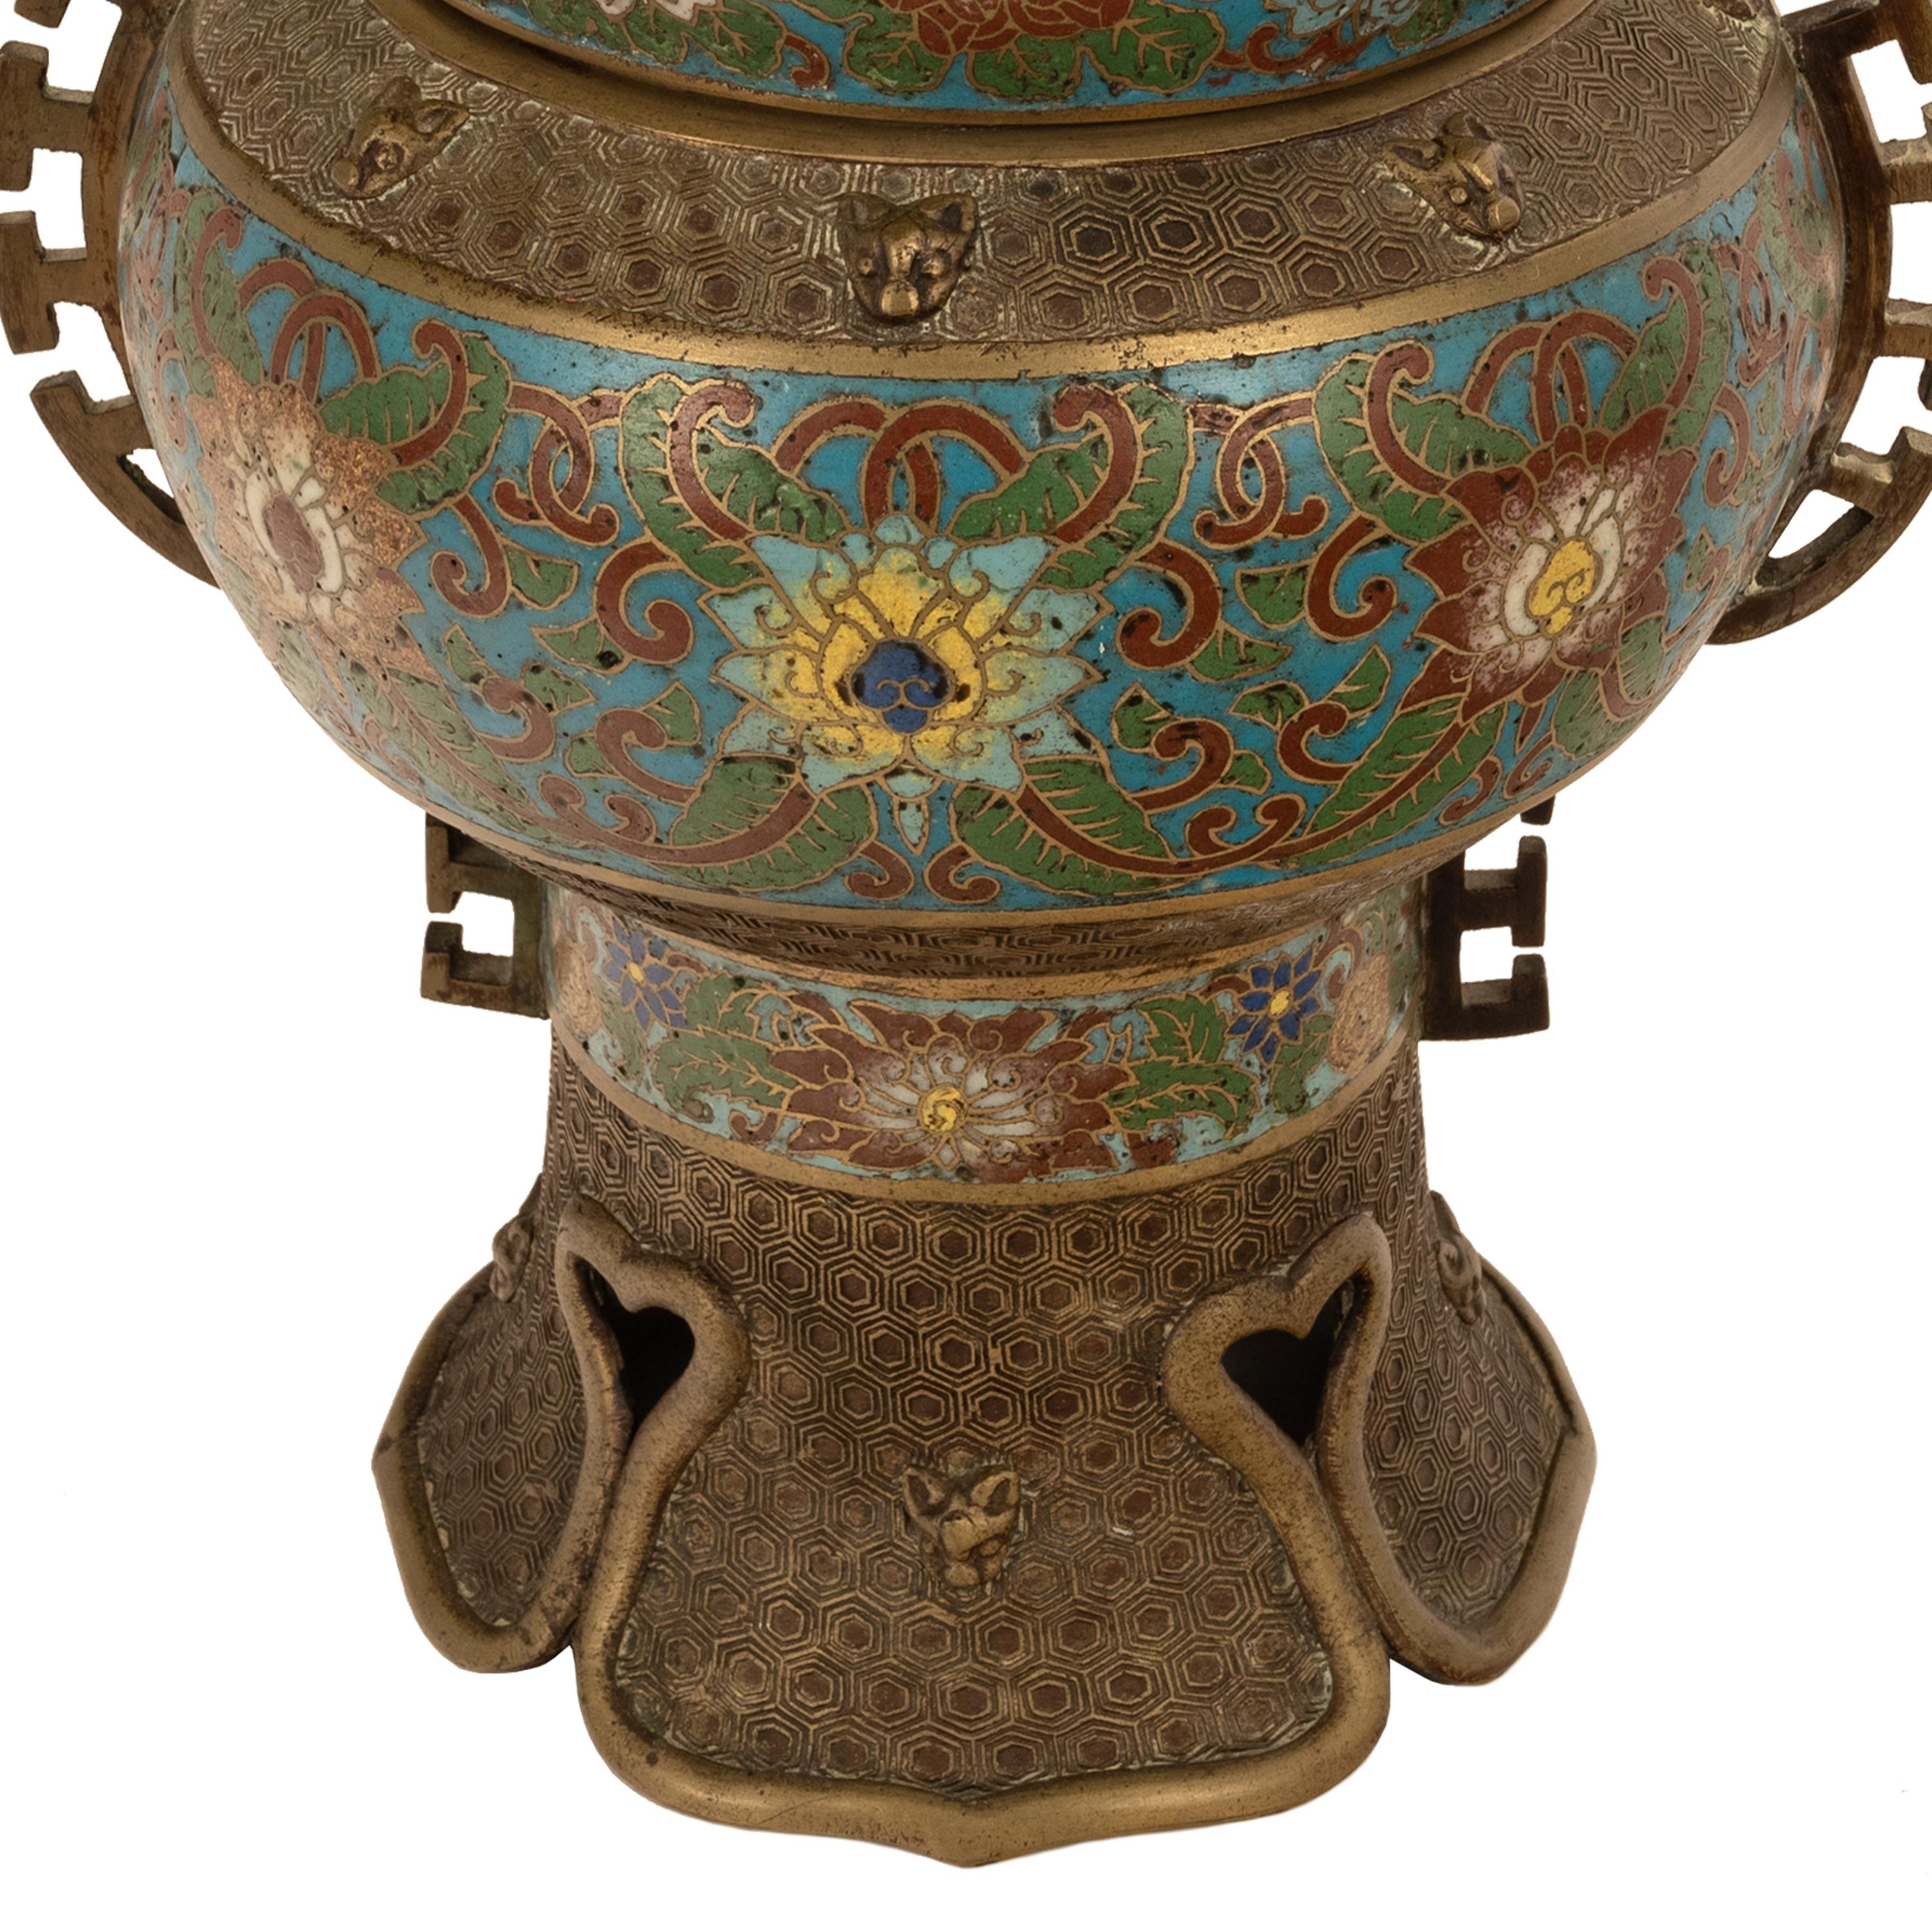 Antique Chinese Qing Dynasty Bronze Cloisonne Enamel Censer Insence Burner 1900 In Good Condition For Sale In Portland, OR